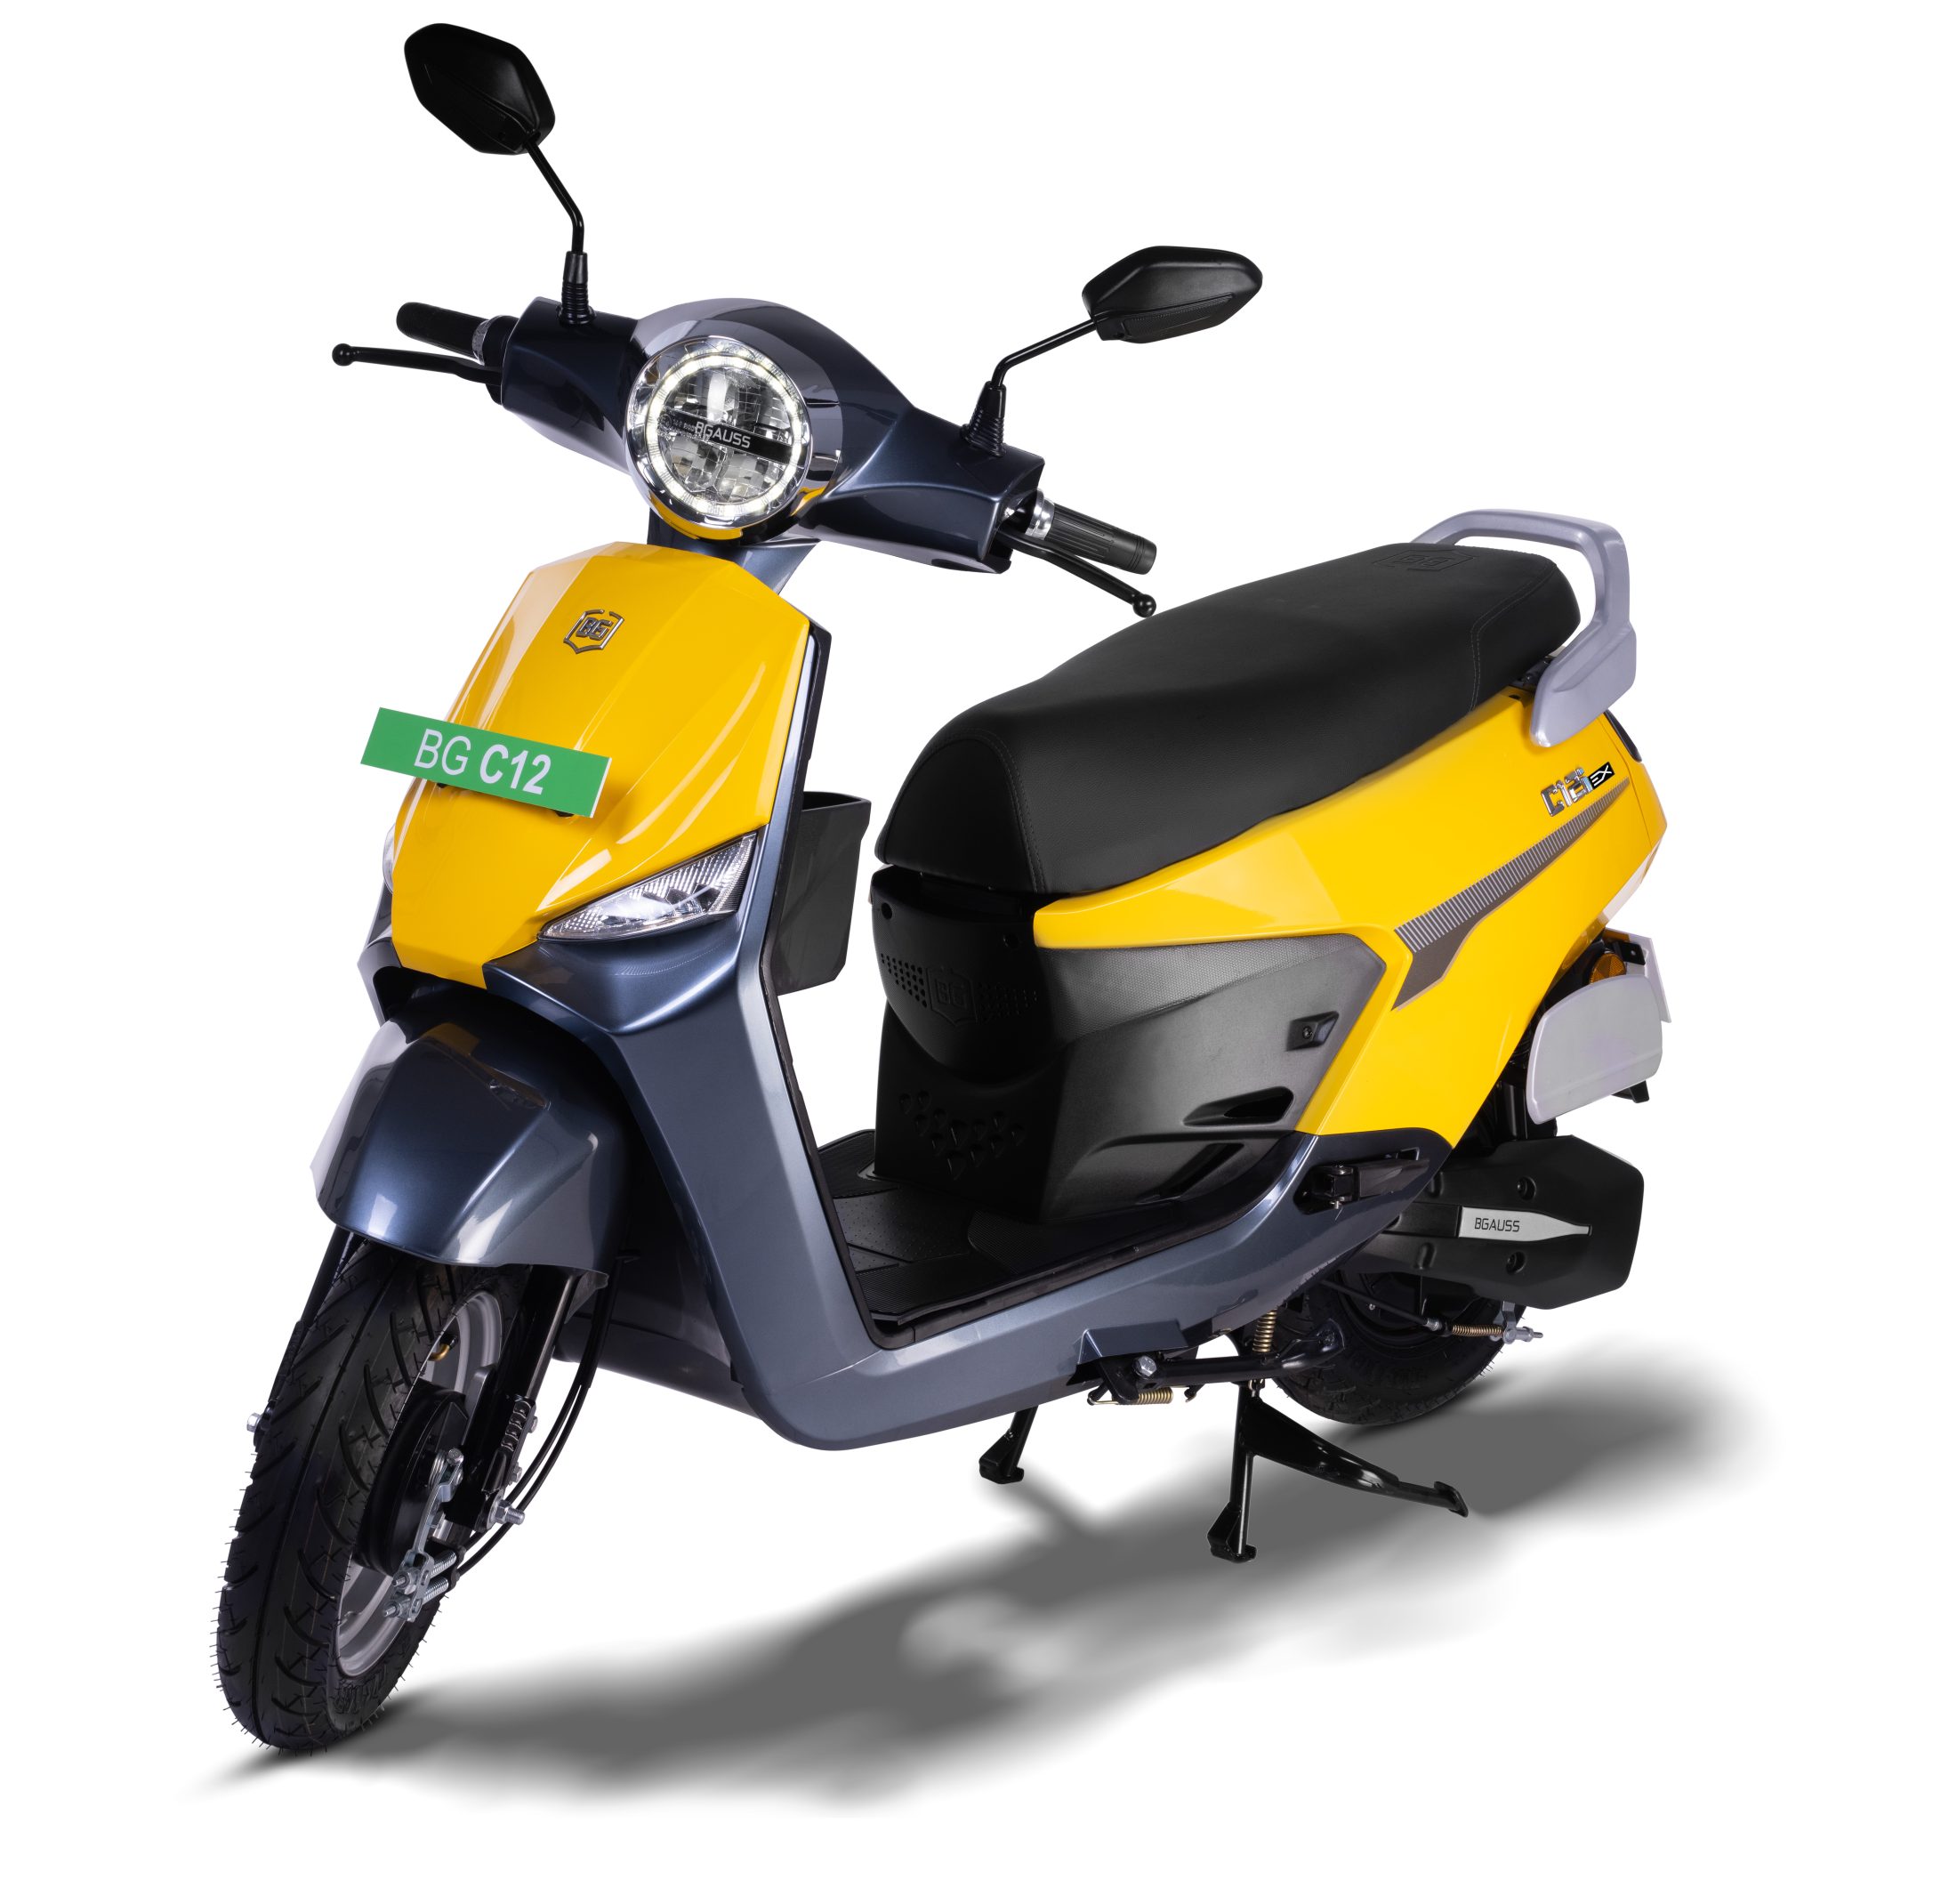 https://e-vehicleinfo.com/bgauss-c12i-ex-electric-scooter-launched-in-india-at-rs-99999/